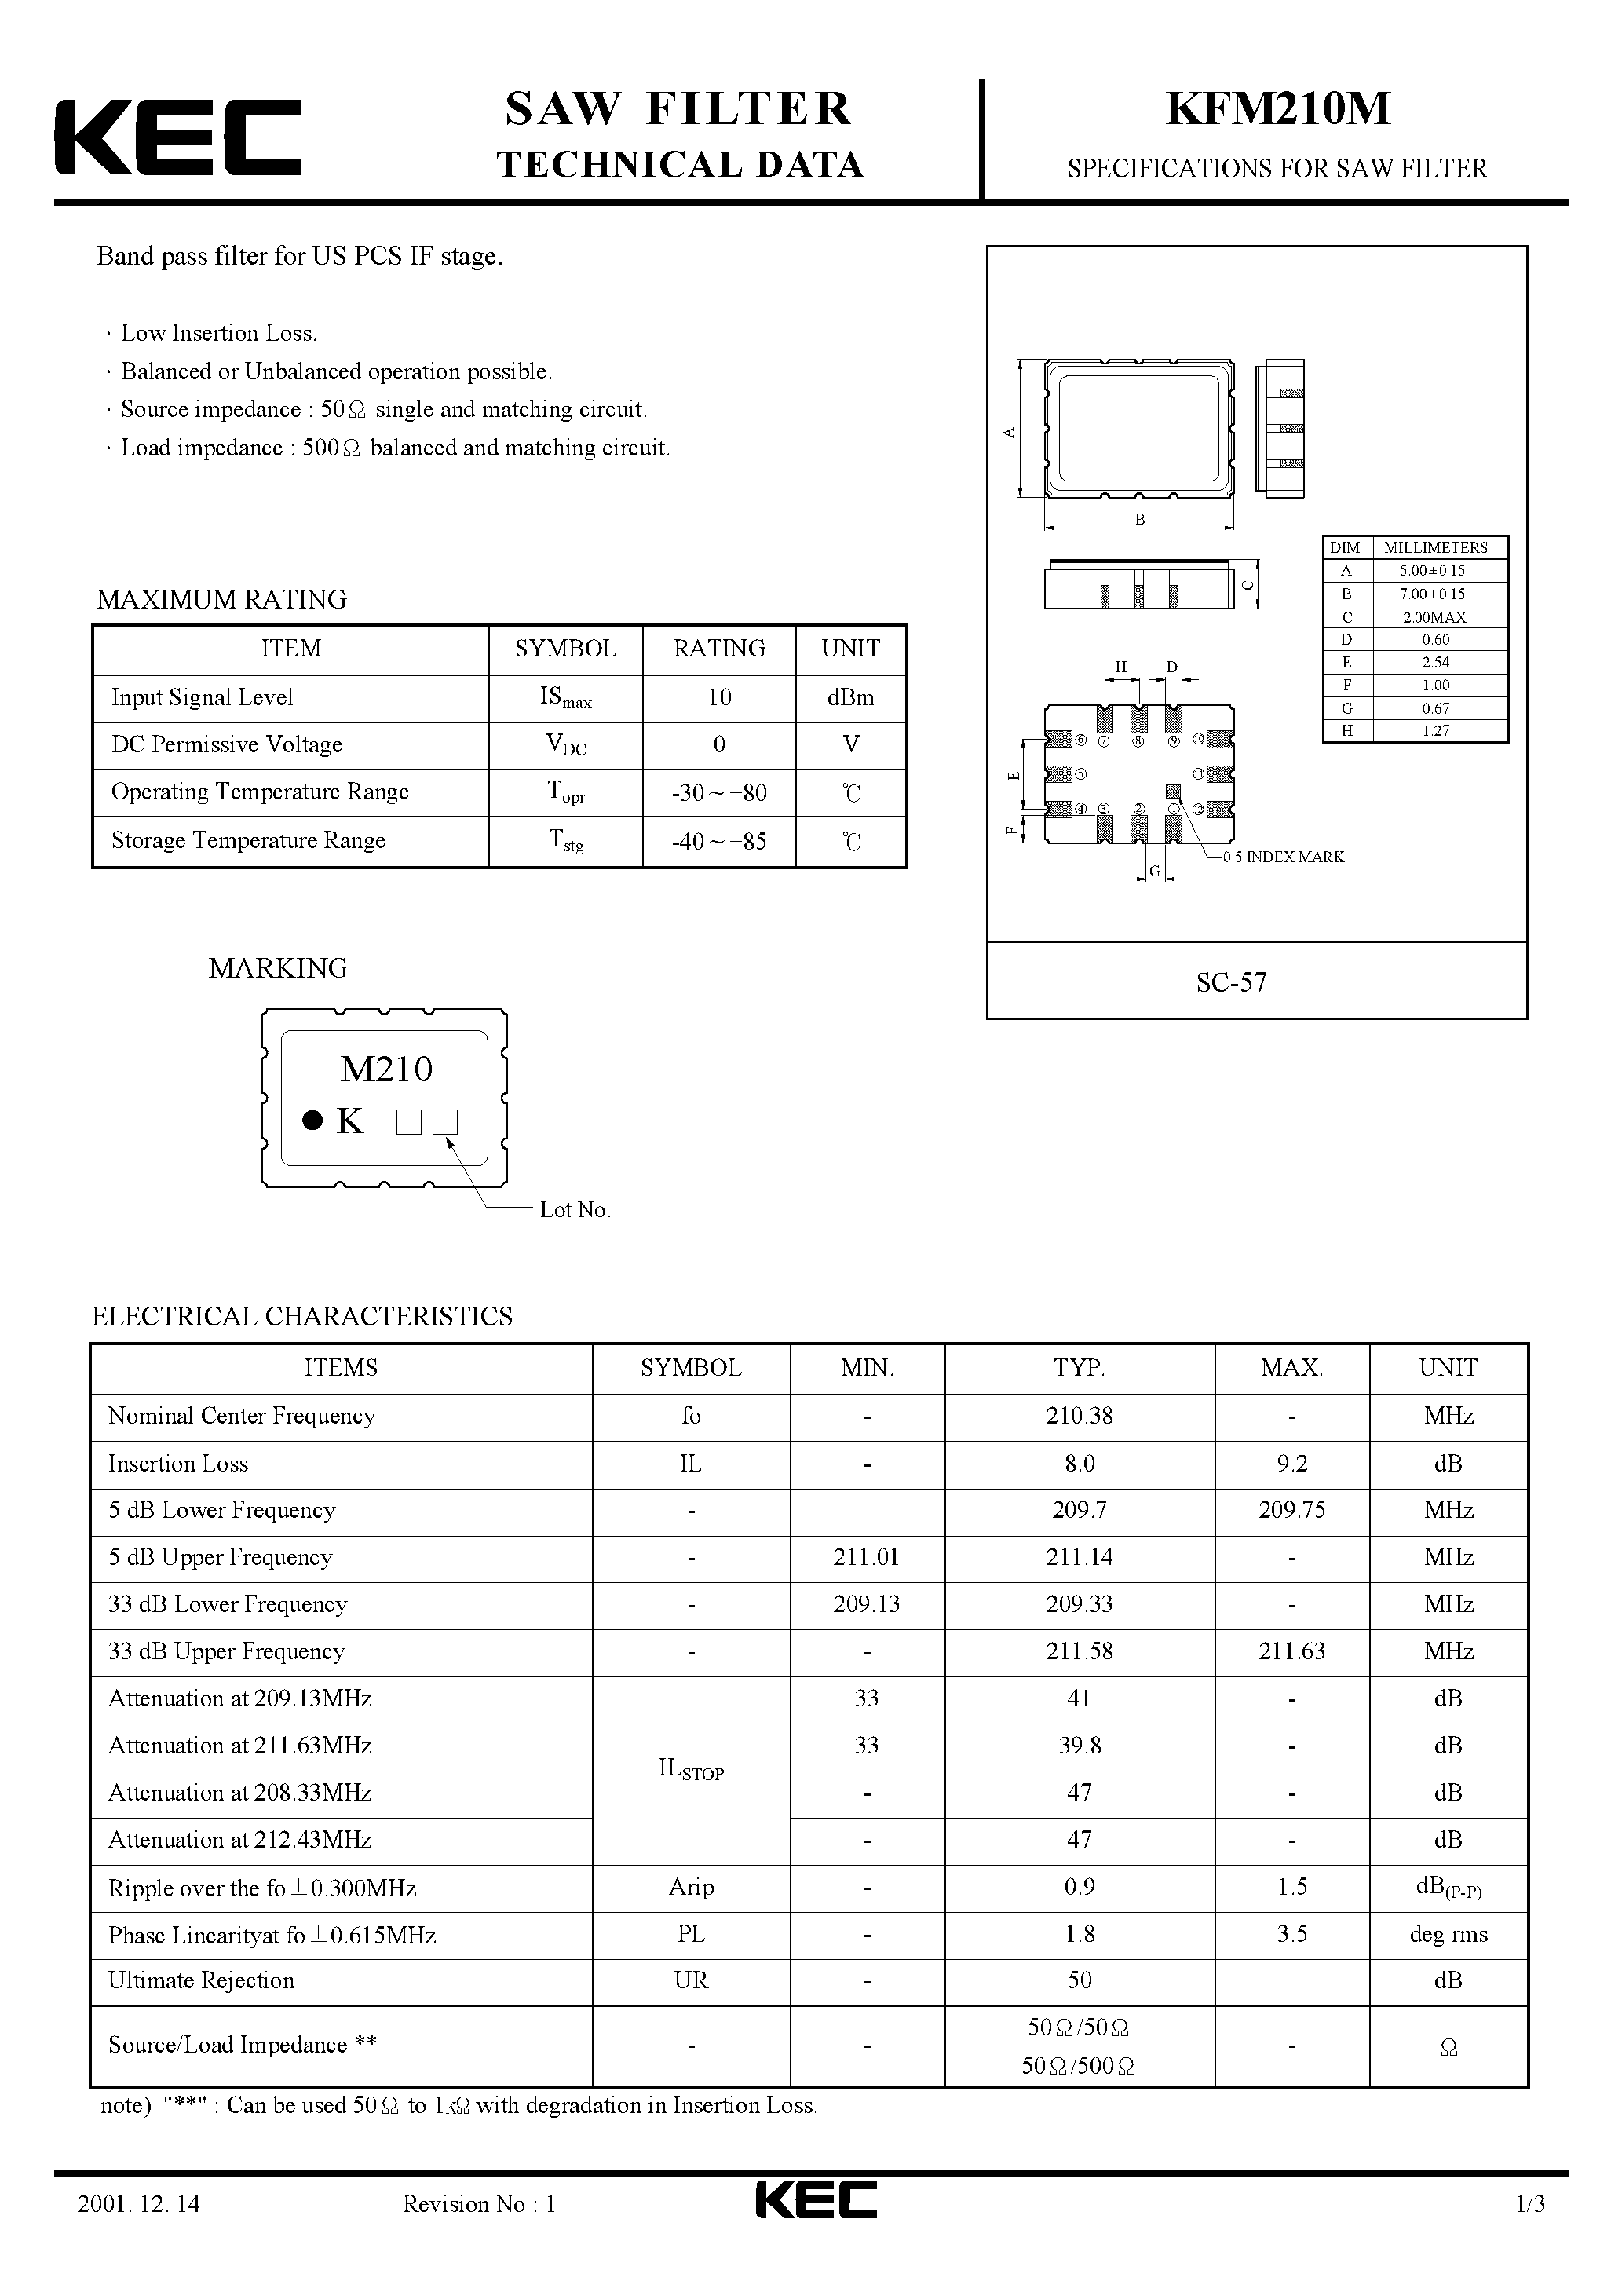 Даташит KFM210M-SPECIFICATIONS FOR SAW FILTER(BAND PASS FILTERS FOR US PCS IF STAGE) страница 1